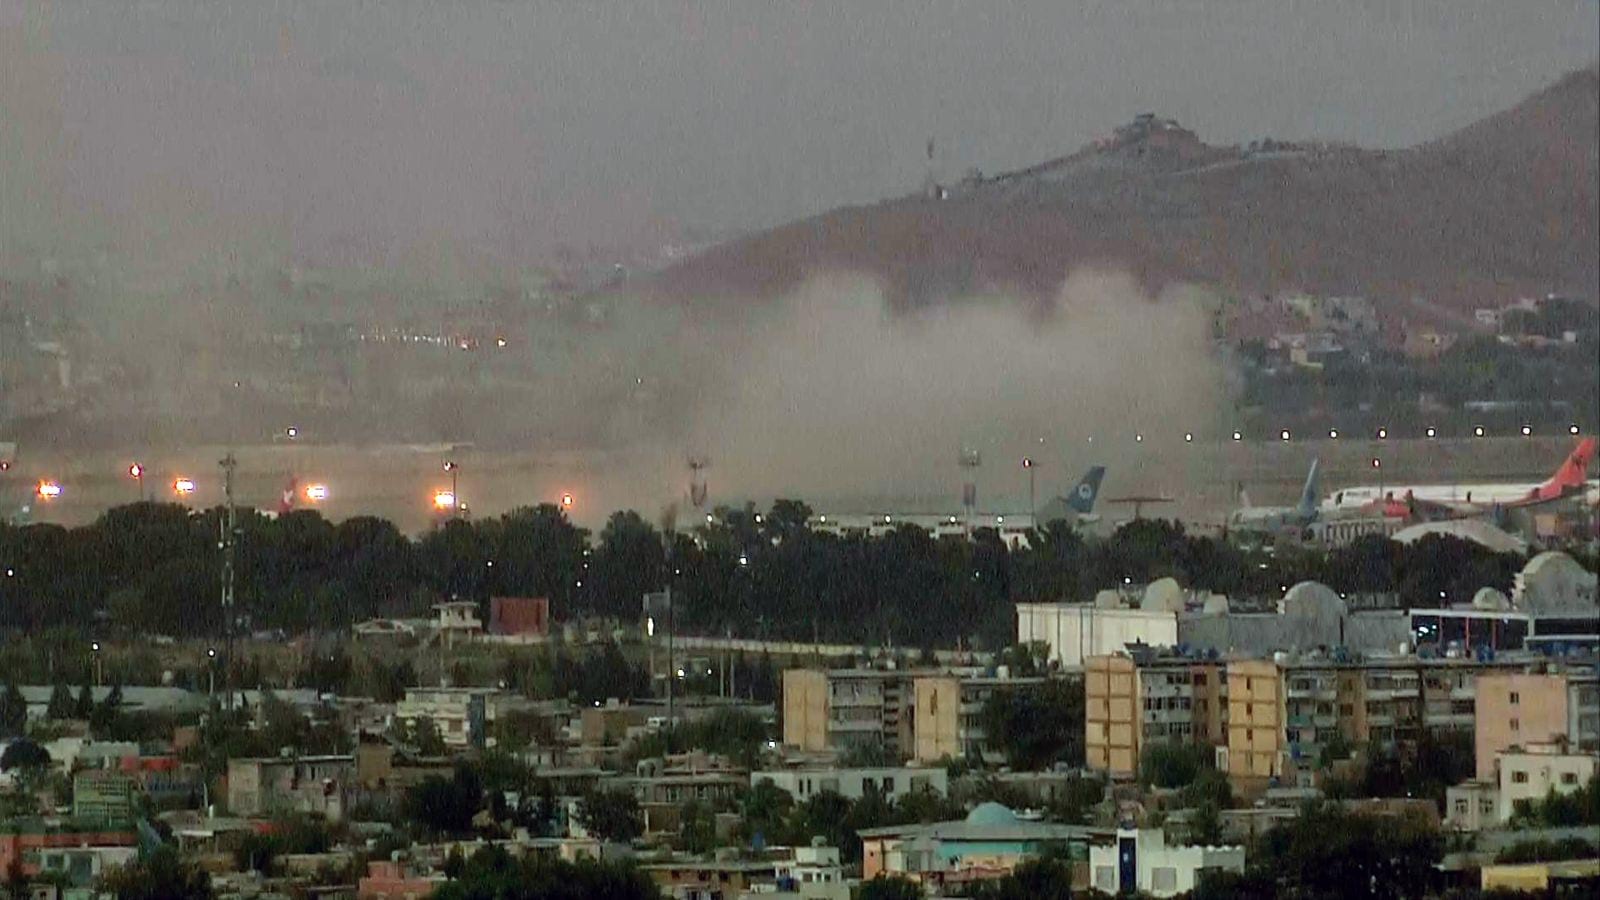 At least 12 U.S. troops killed in Kabul airport attack, officials say